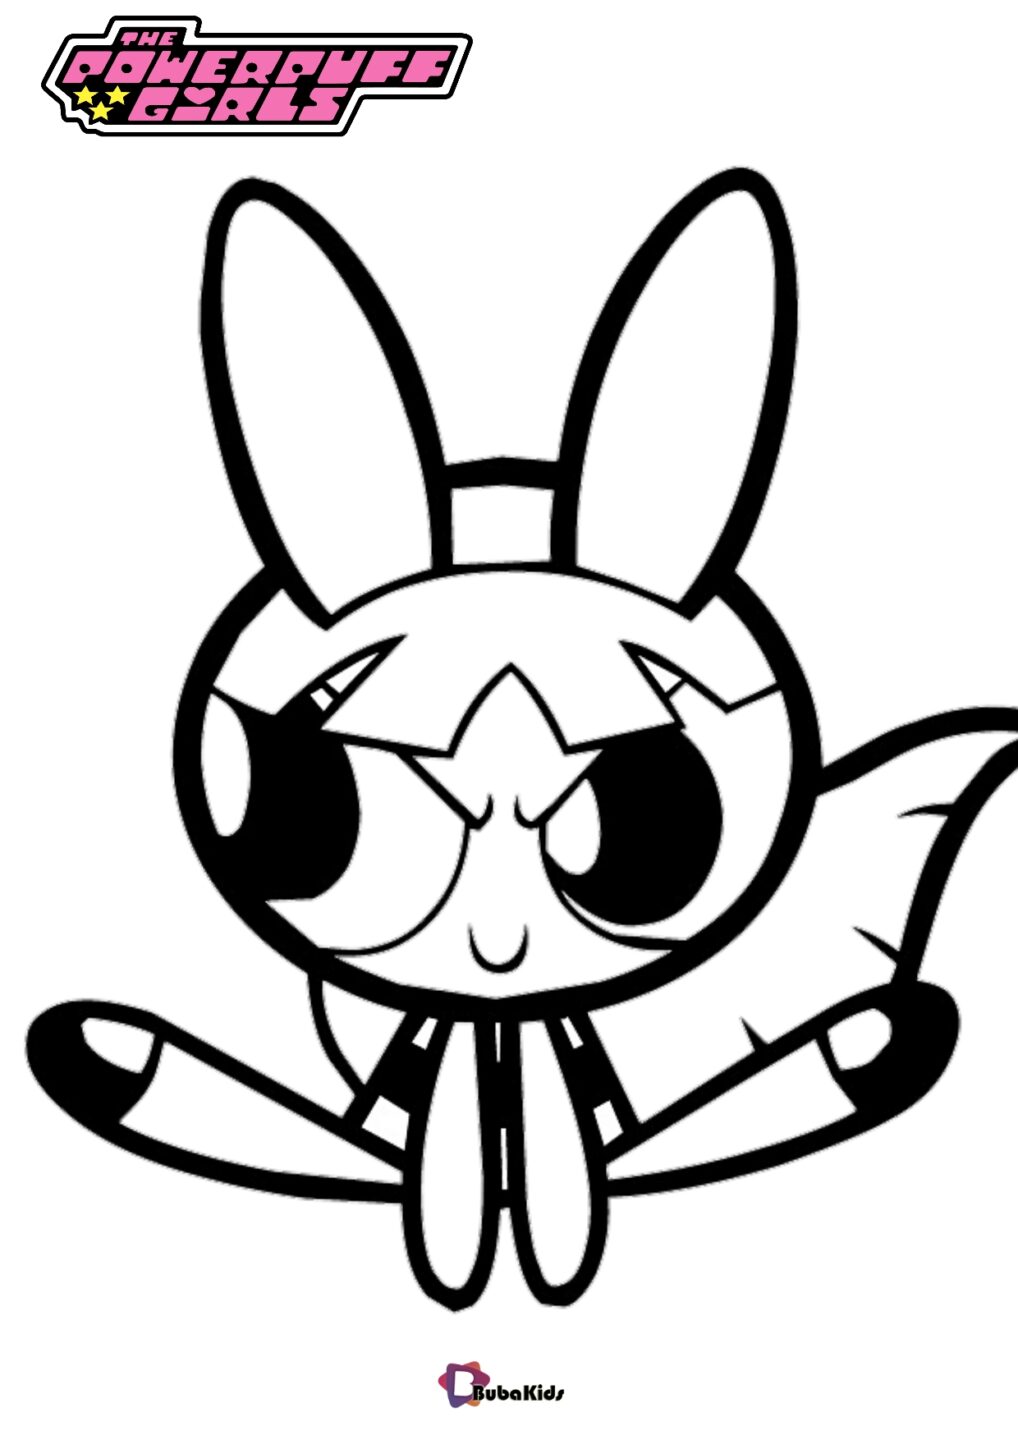 Blossom The Powerpuff girls coloring pages Cartoon Network TV series